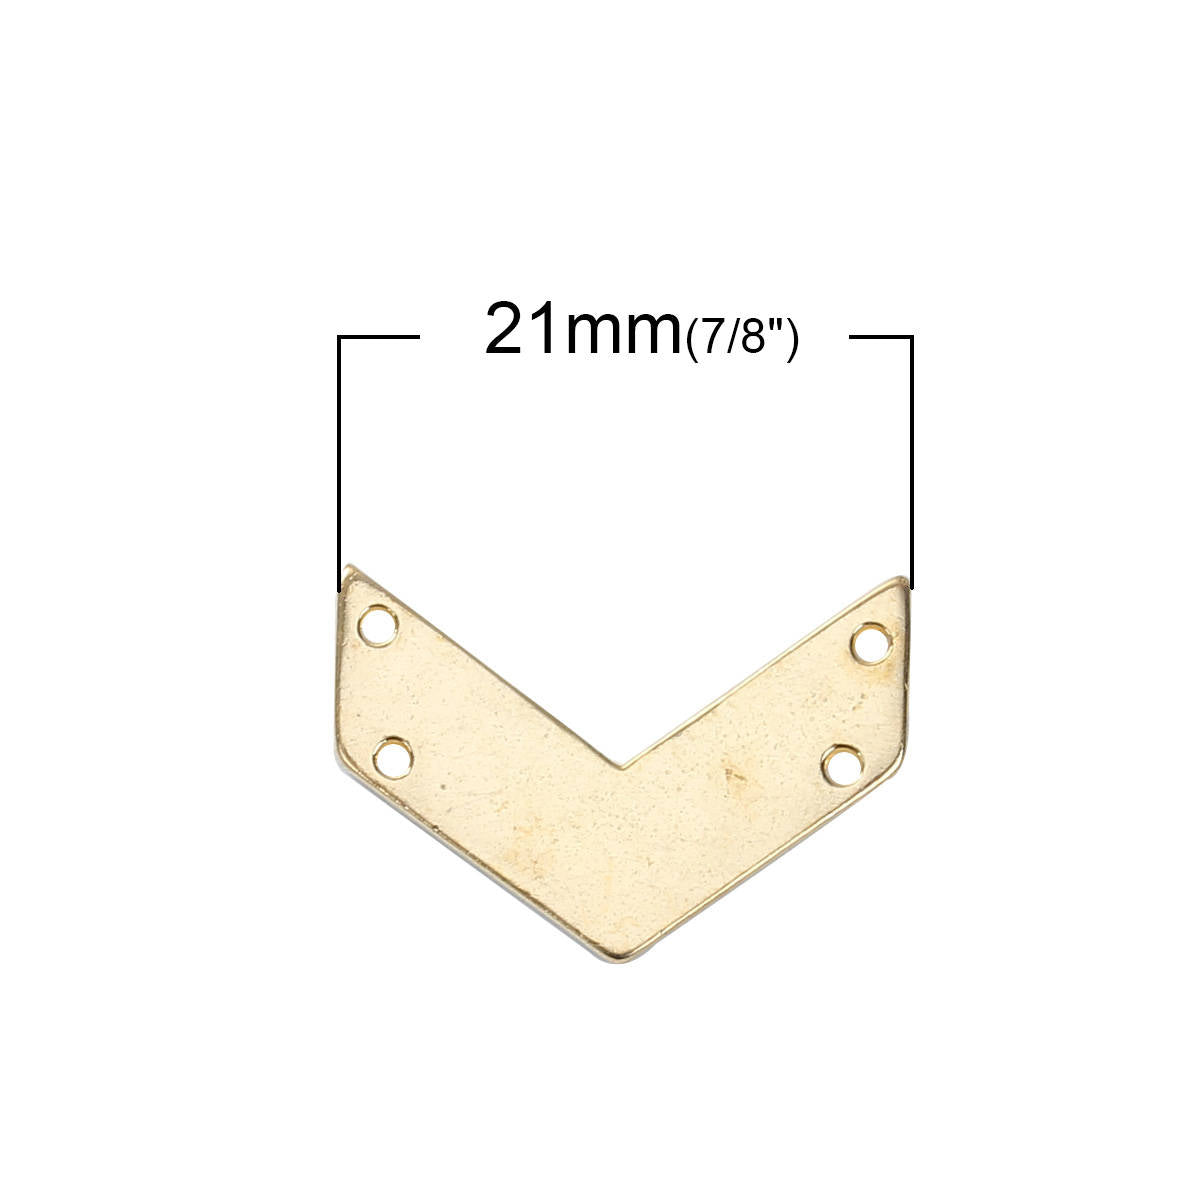 2pcs, 21mm x 14mm, Zinc Based Alloy Chevron Connectors V-shaped Double side Hole  in Gold